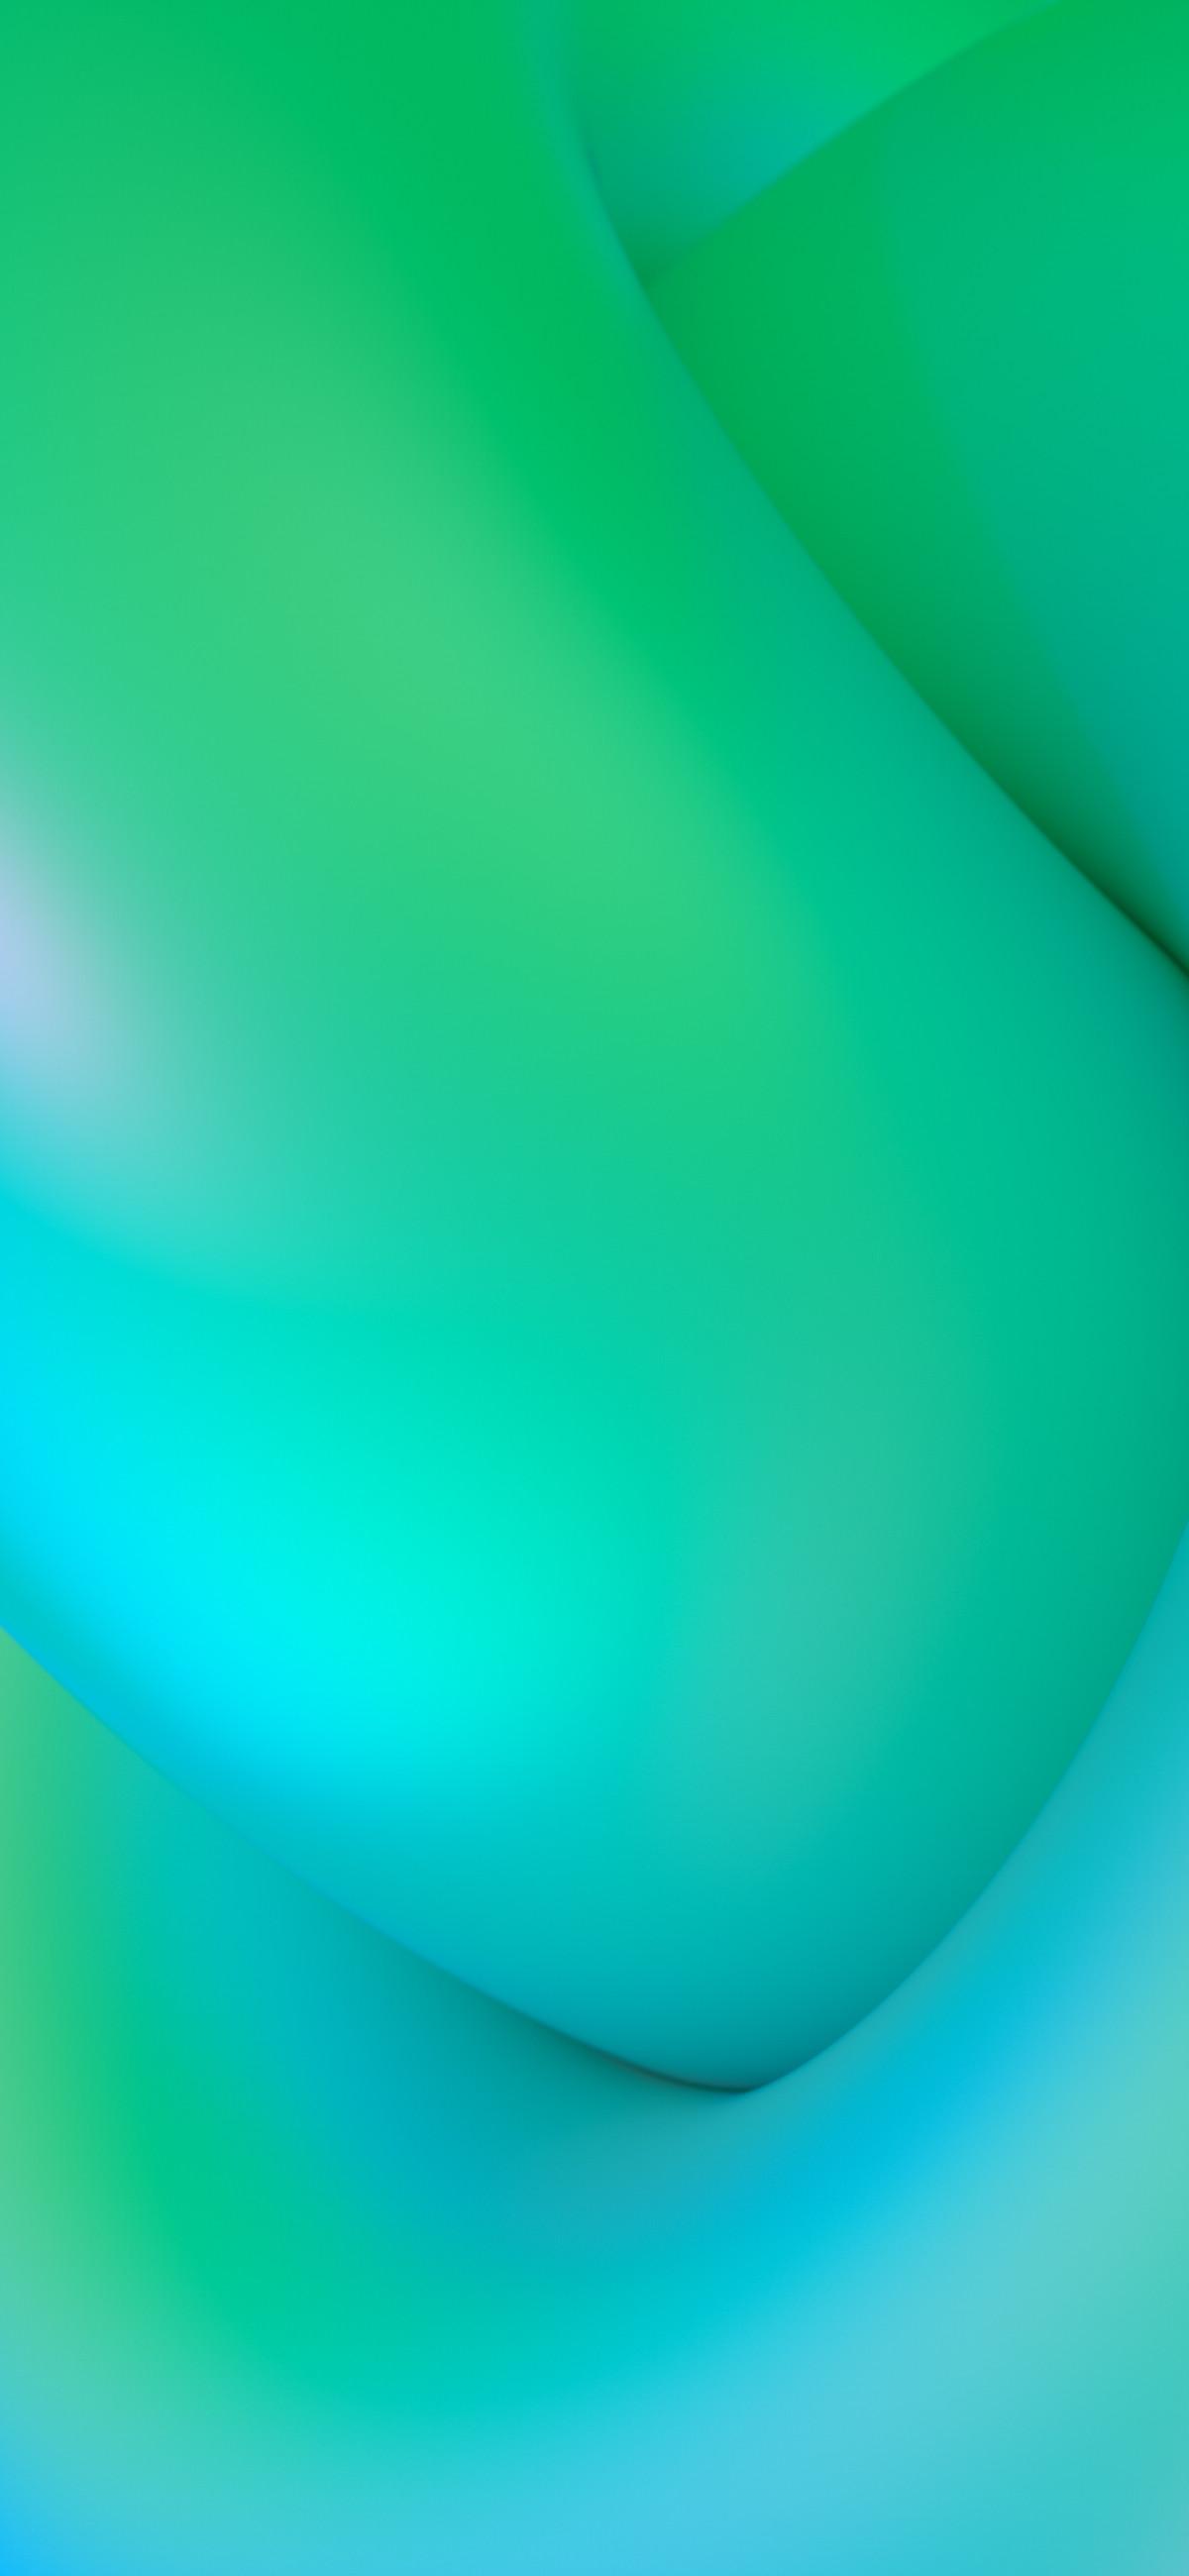 84+ Teal Iphone Wallpapers